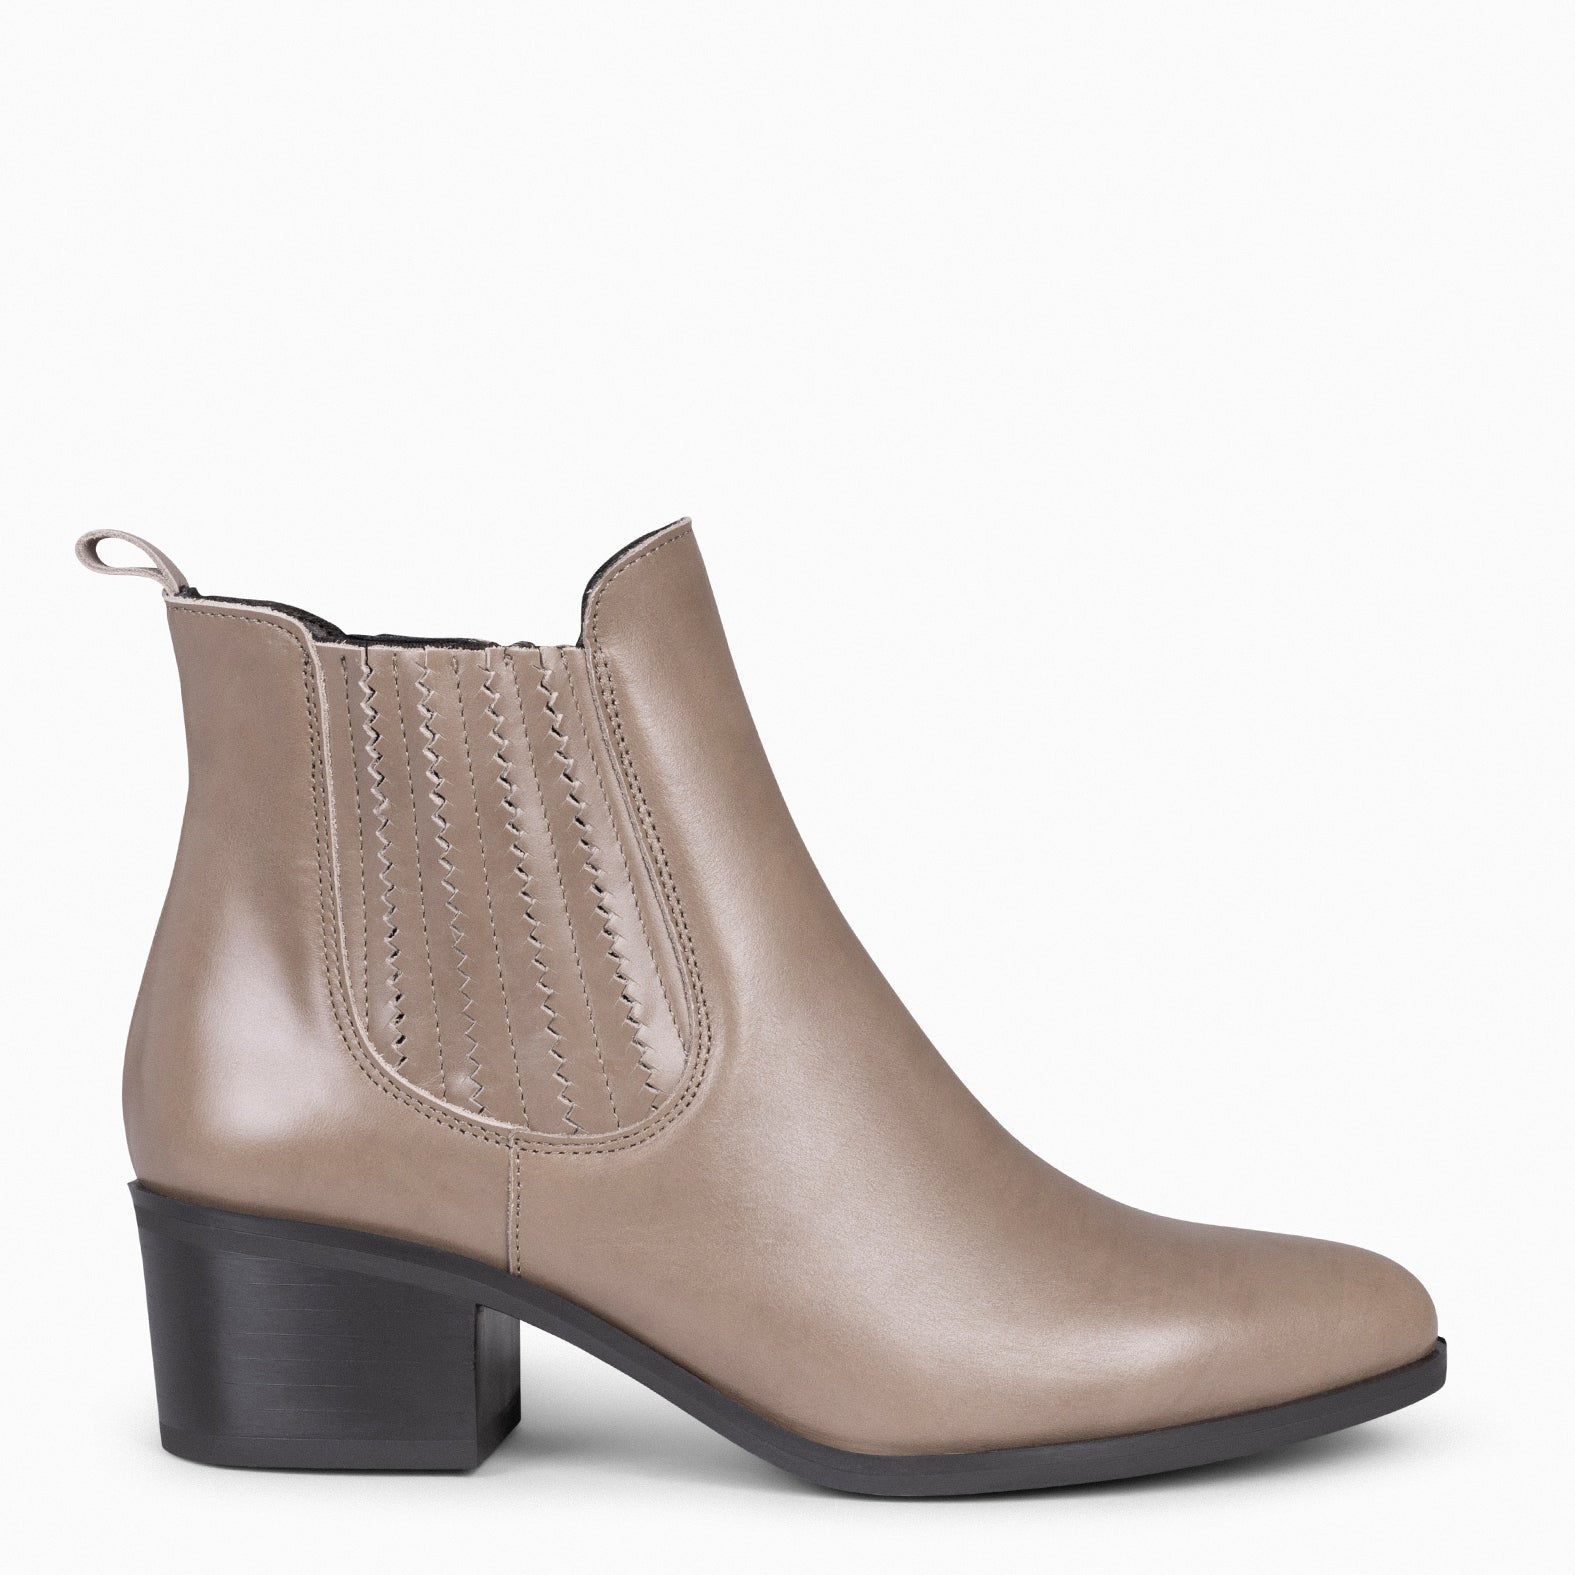 SHELLY - Botines camperos Mujer TAUPE